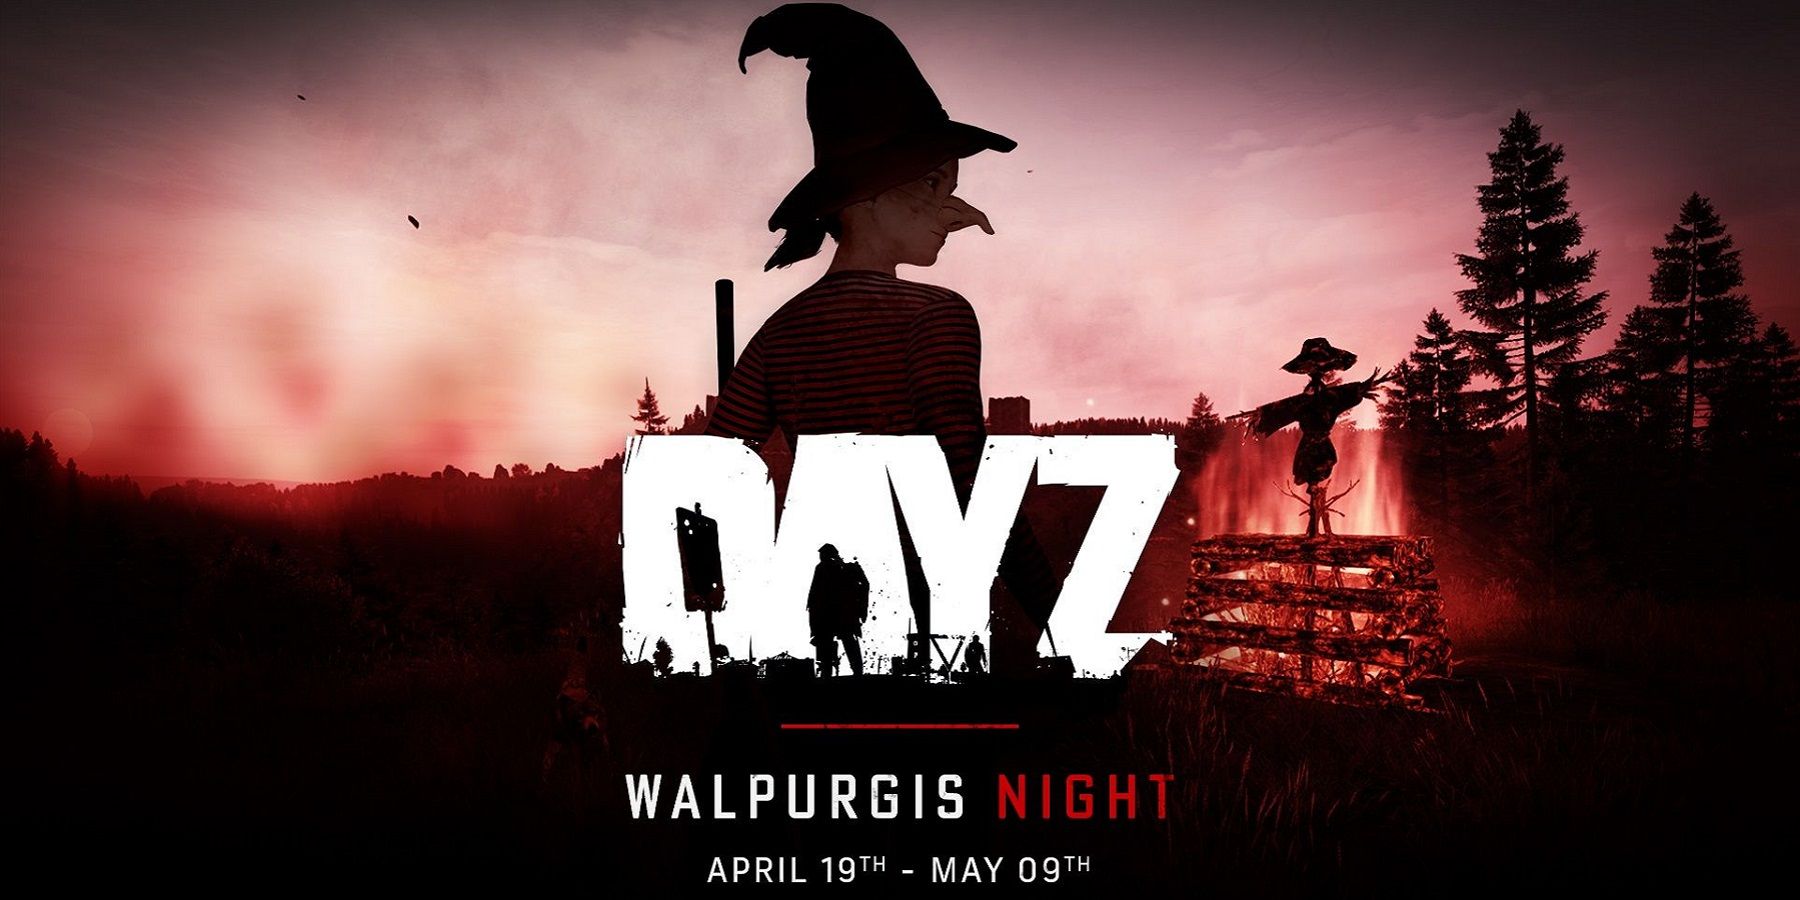 DayZ logo with a Withc-looking person behind it and the "Walpurgis Night" event being shown.